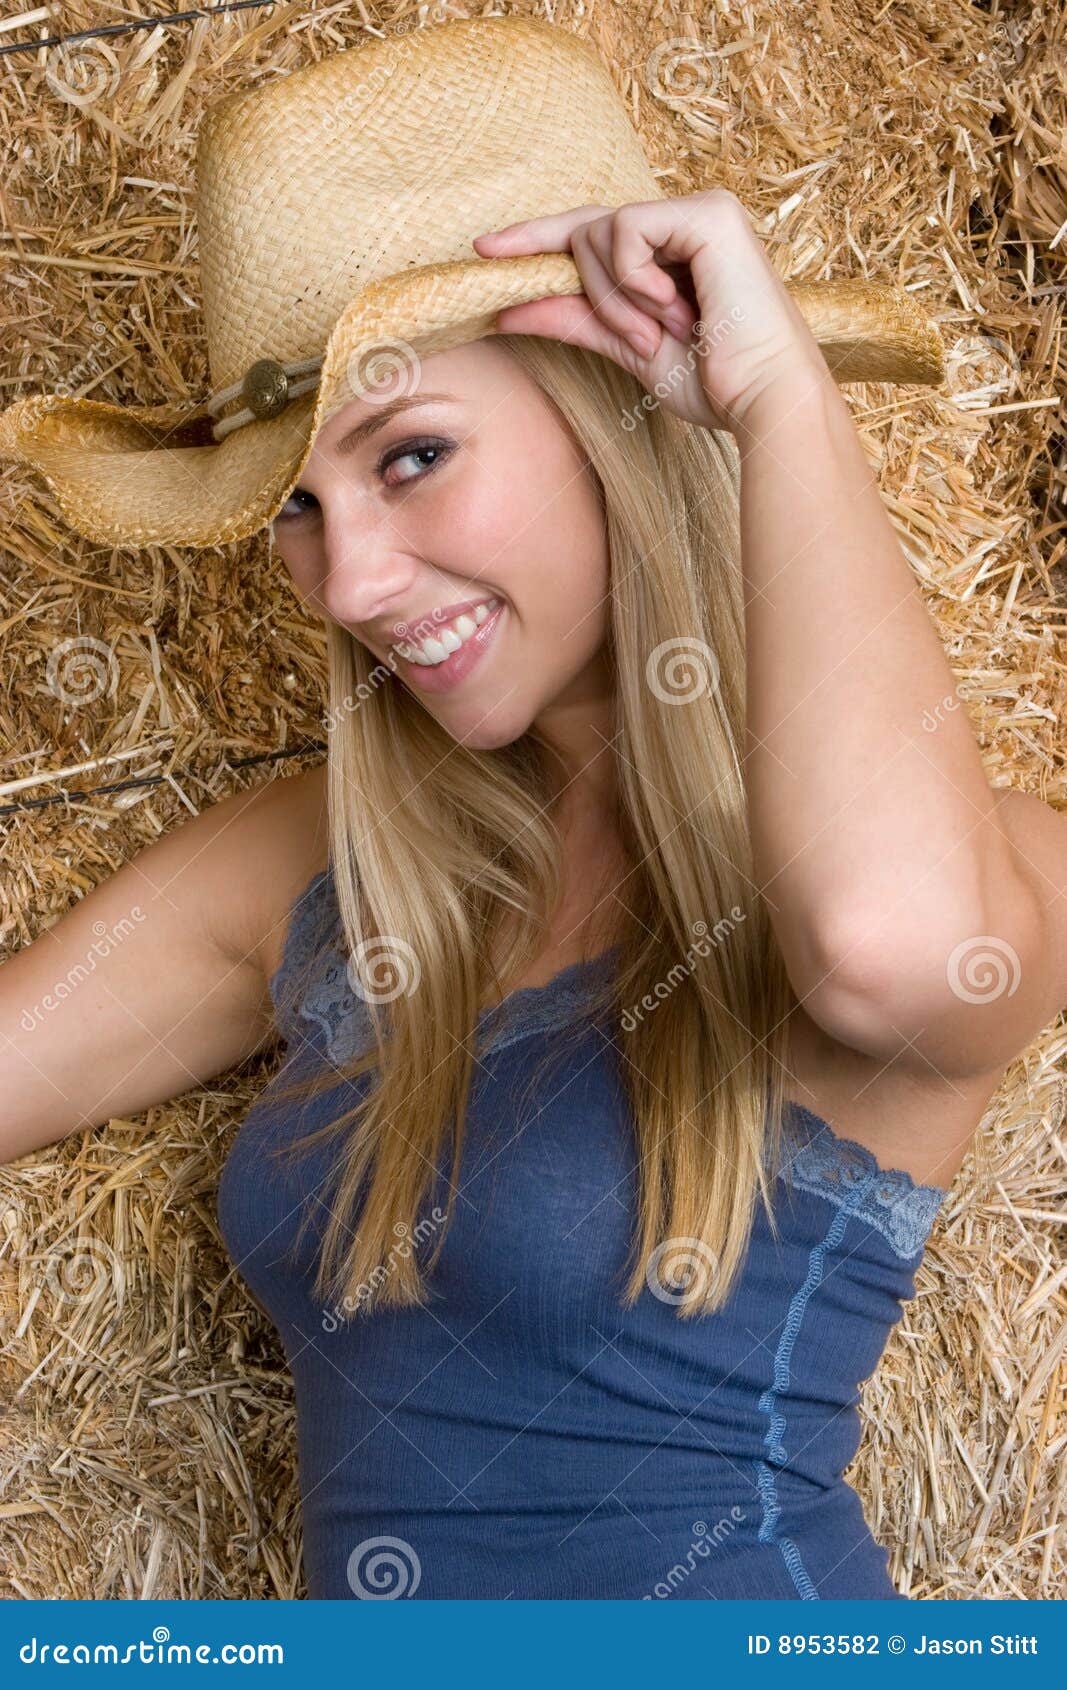 amateur teen cowgirl pov Sex Images Hq